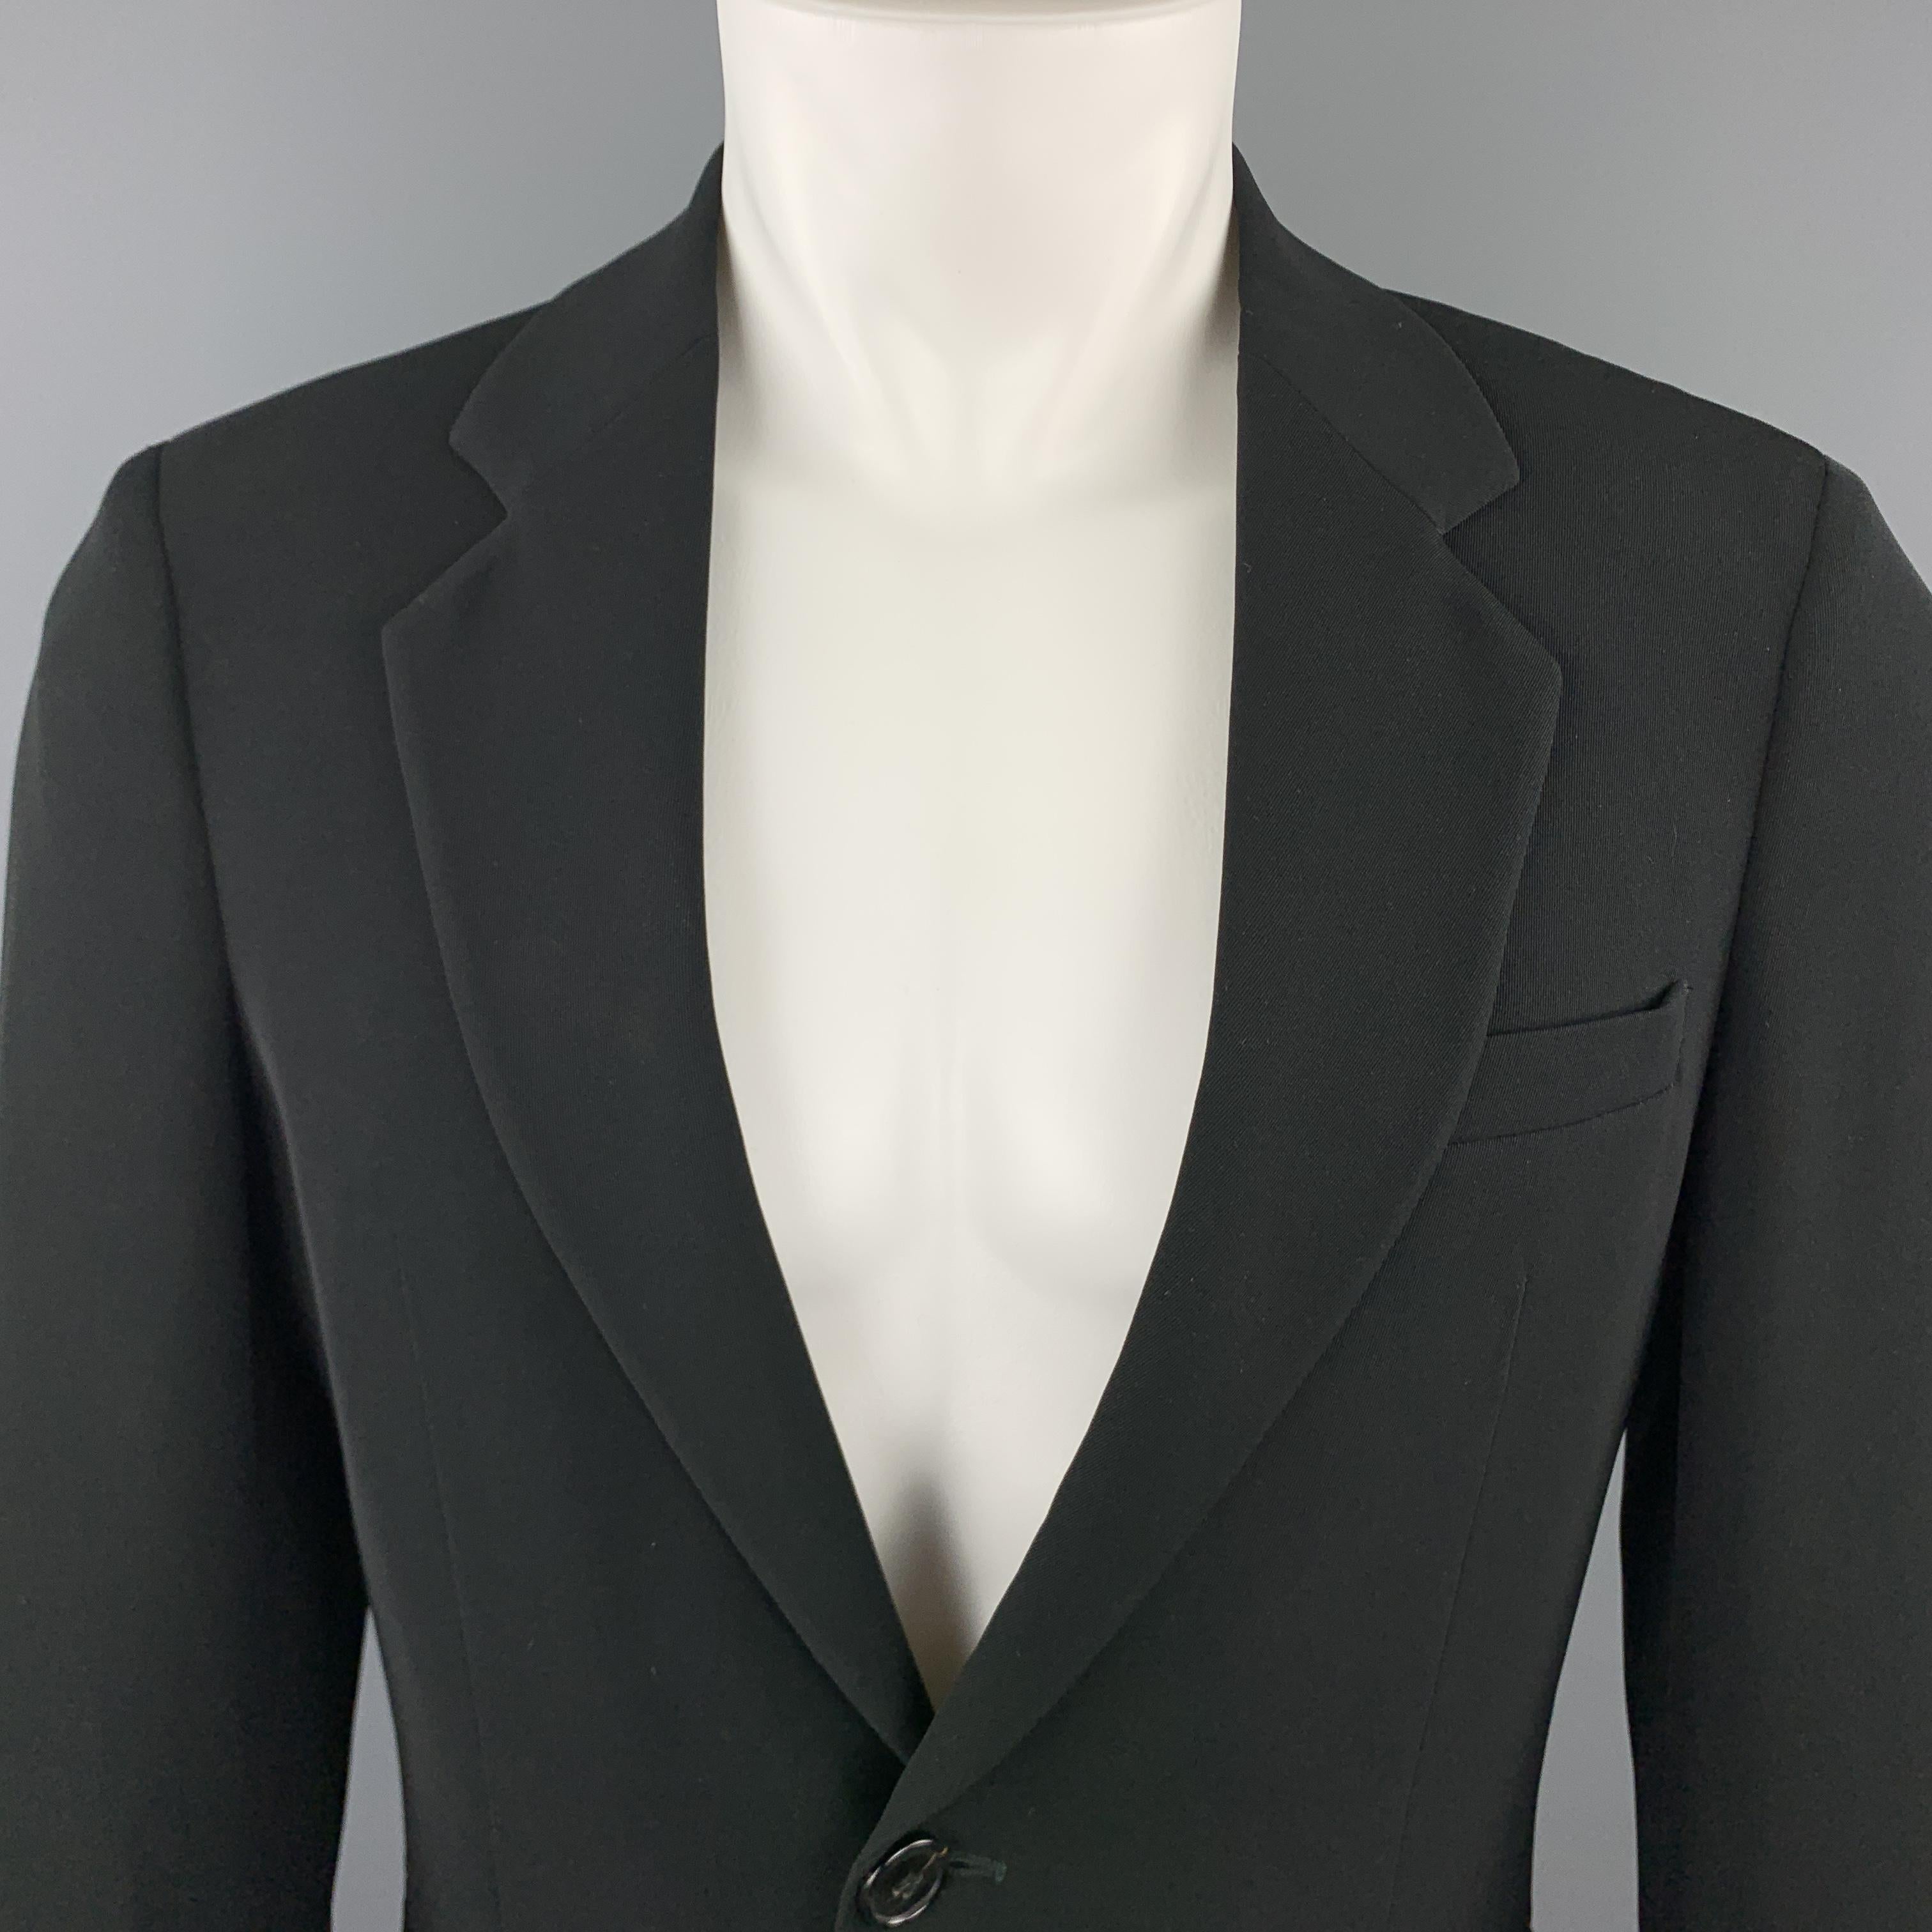 EMPORIO ARMANI sport coat comes in a solid black lightweight polyester material, with a notch lapel, slit pockets, two buttons at closure, single breasted,  buttoned cuffs, and a double vent at back. Made in Italy. 

Excellent Pre-Owned